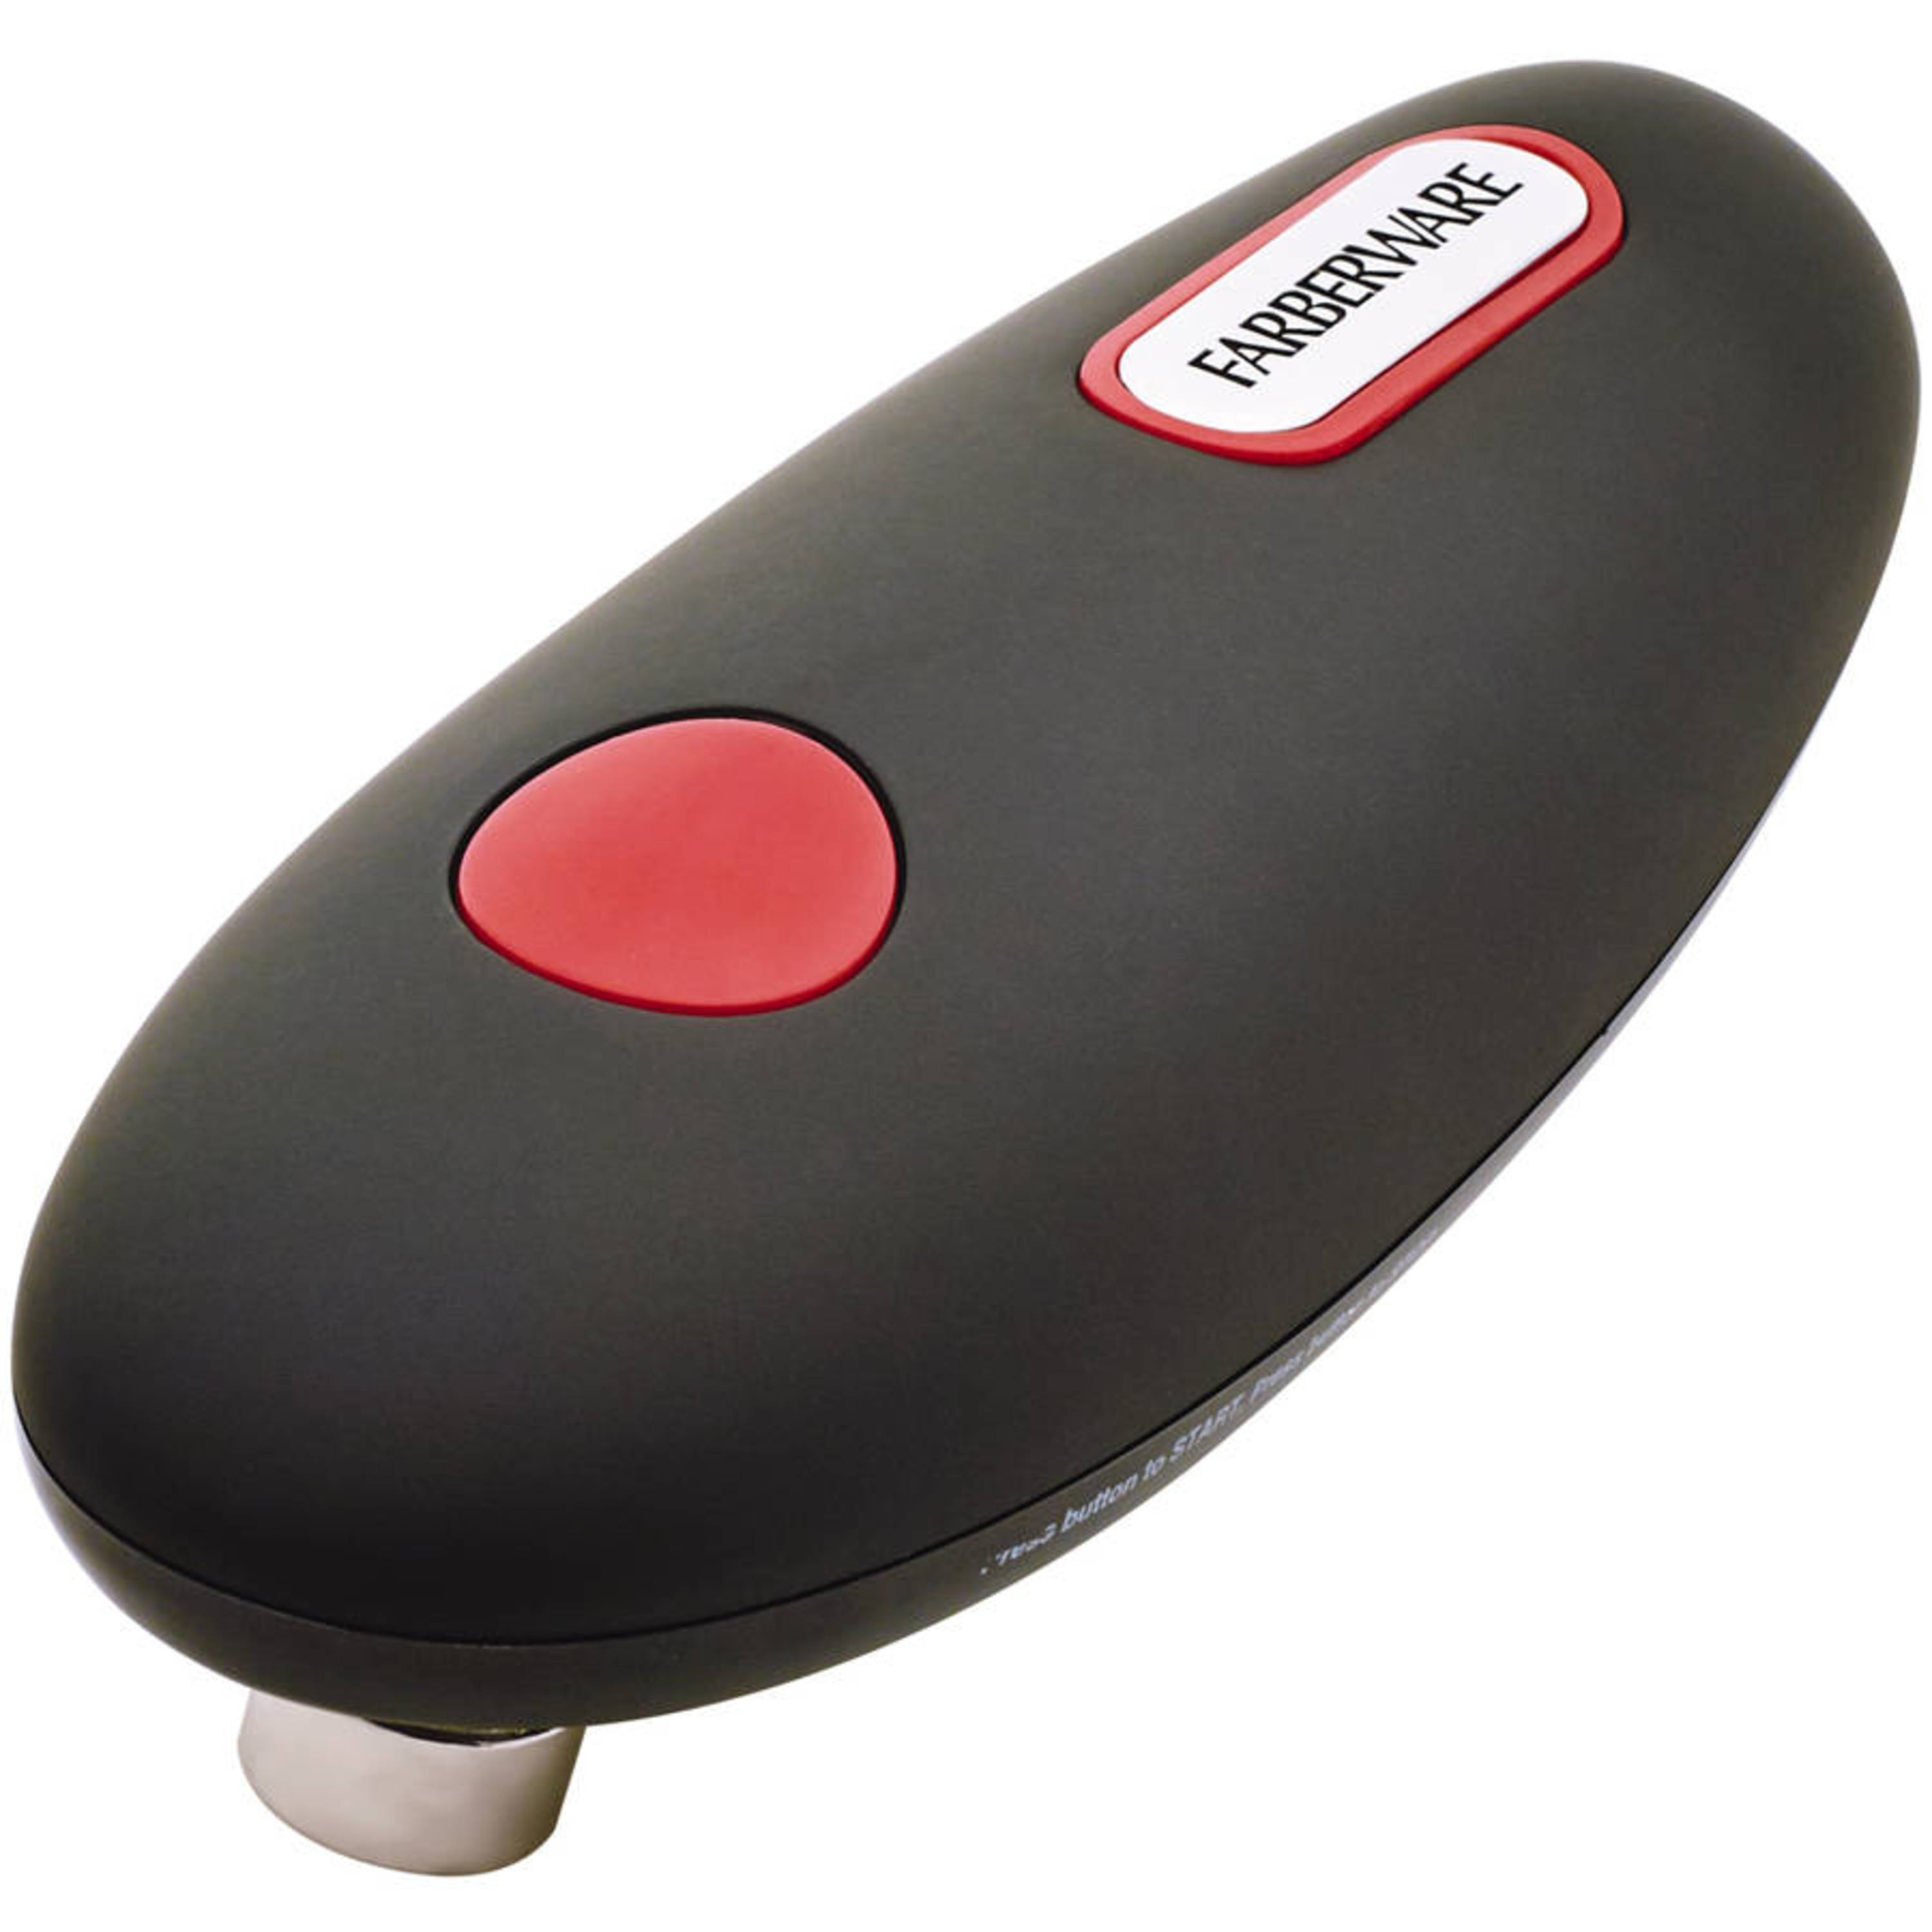 Farberware Hands-Free Battery-Operated Black Can Opener in Red - image 1 of 18